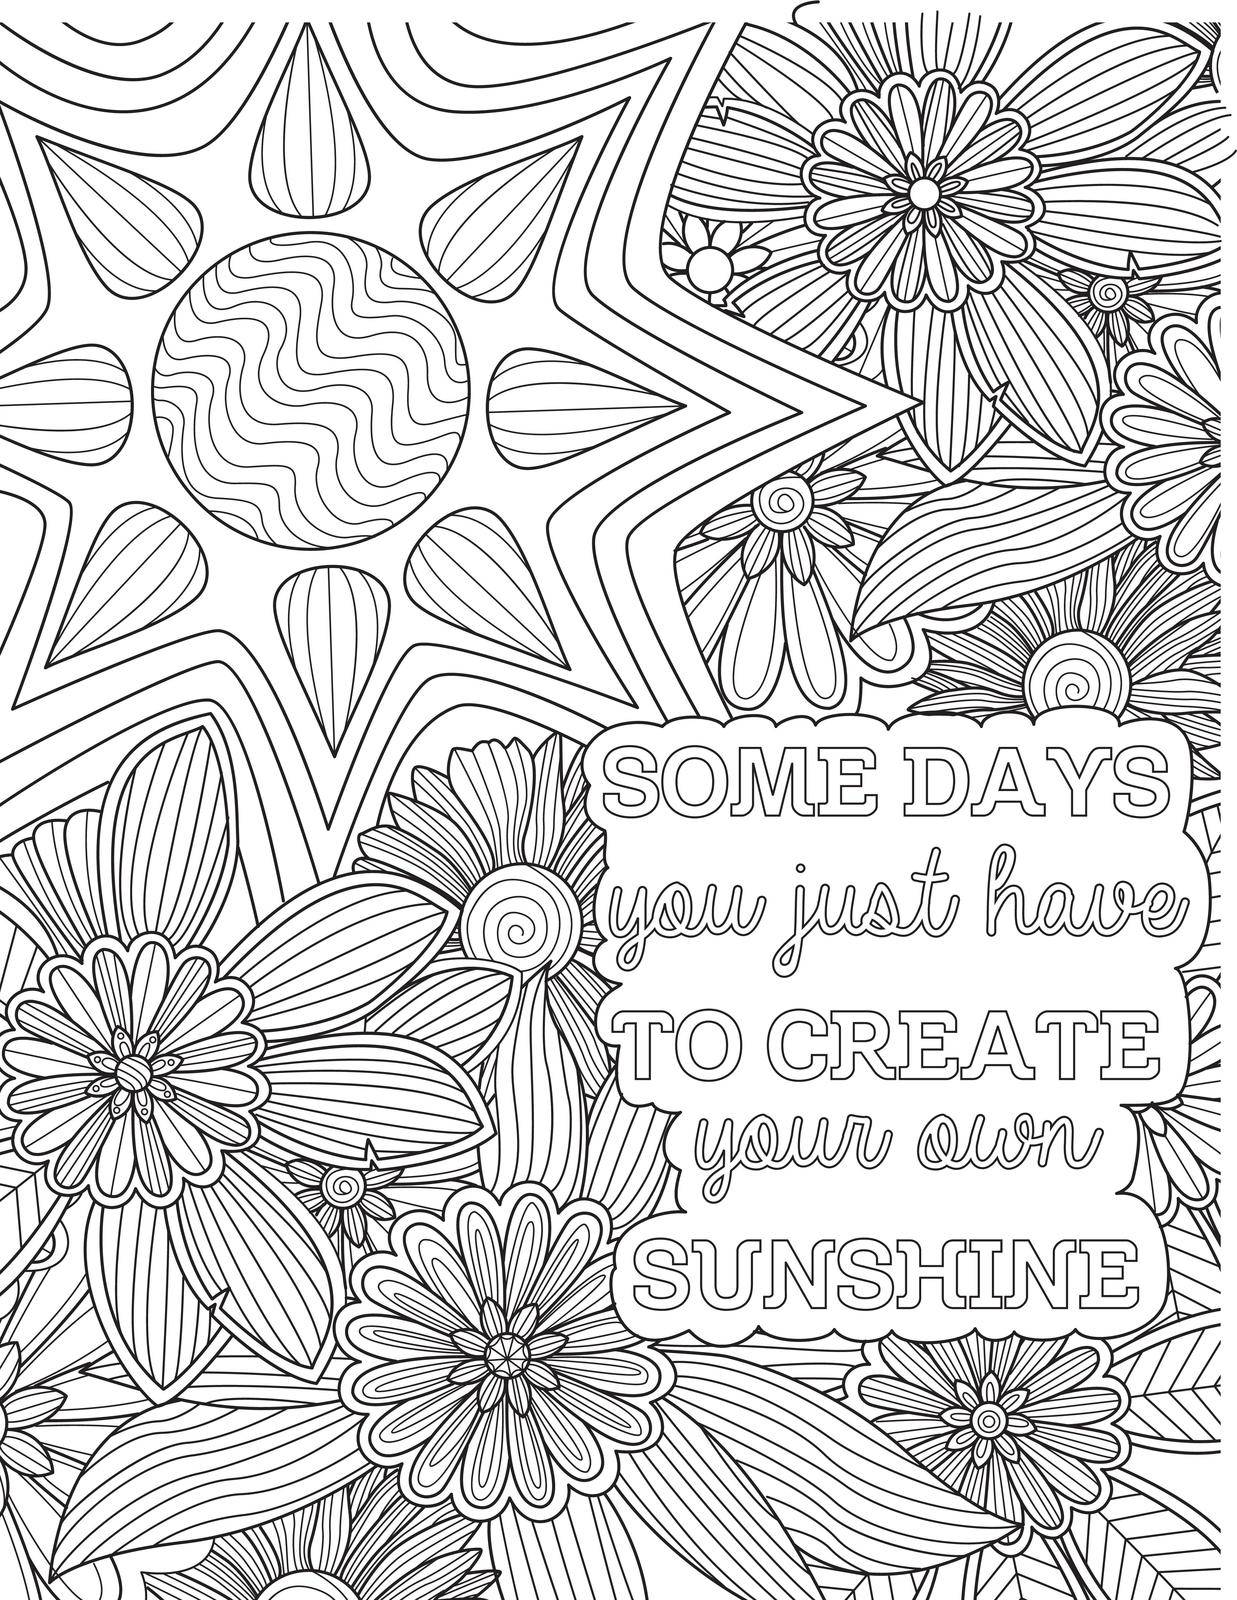 Sun Line Drawing Shining Above Inspirational Note Surrounded With Flowers.